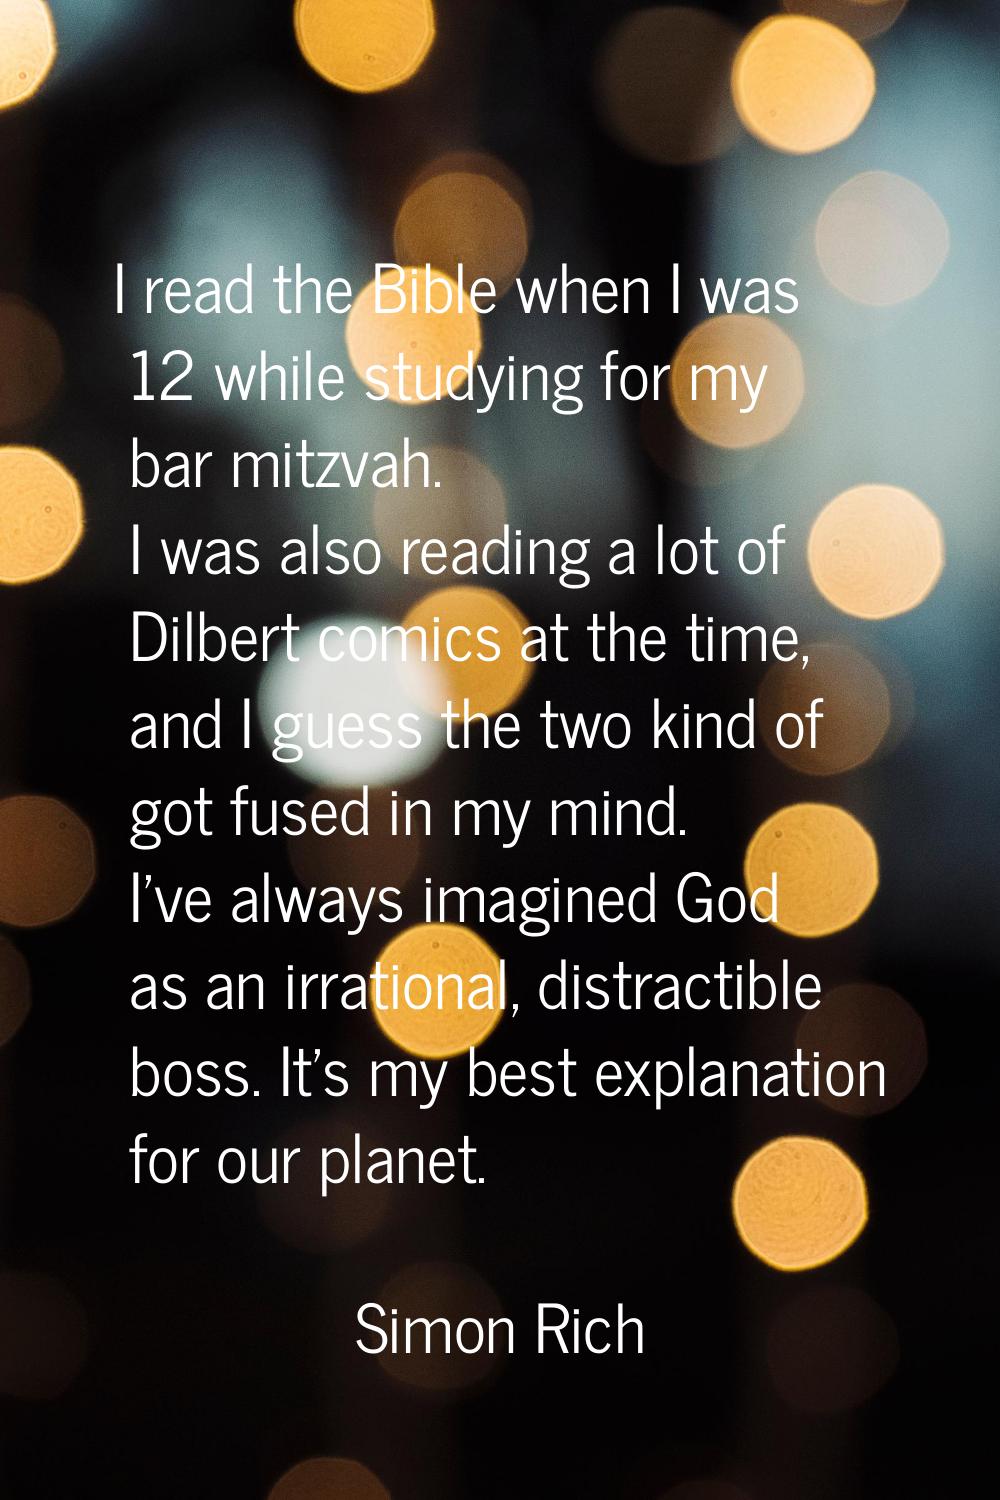 I read the Bible when I was 12 while studying for my bar mitzvah. I was also reading a lot of Dilbe